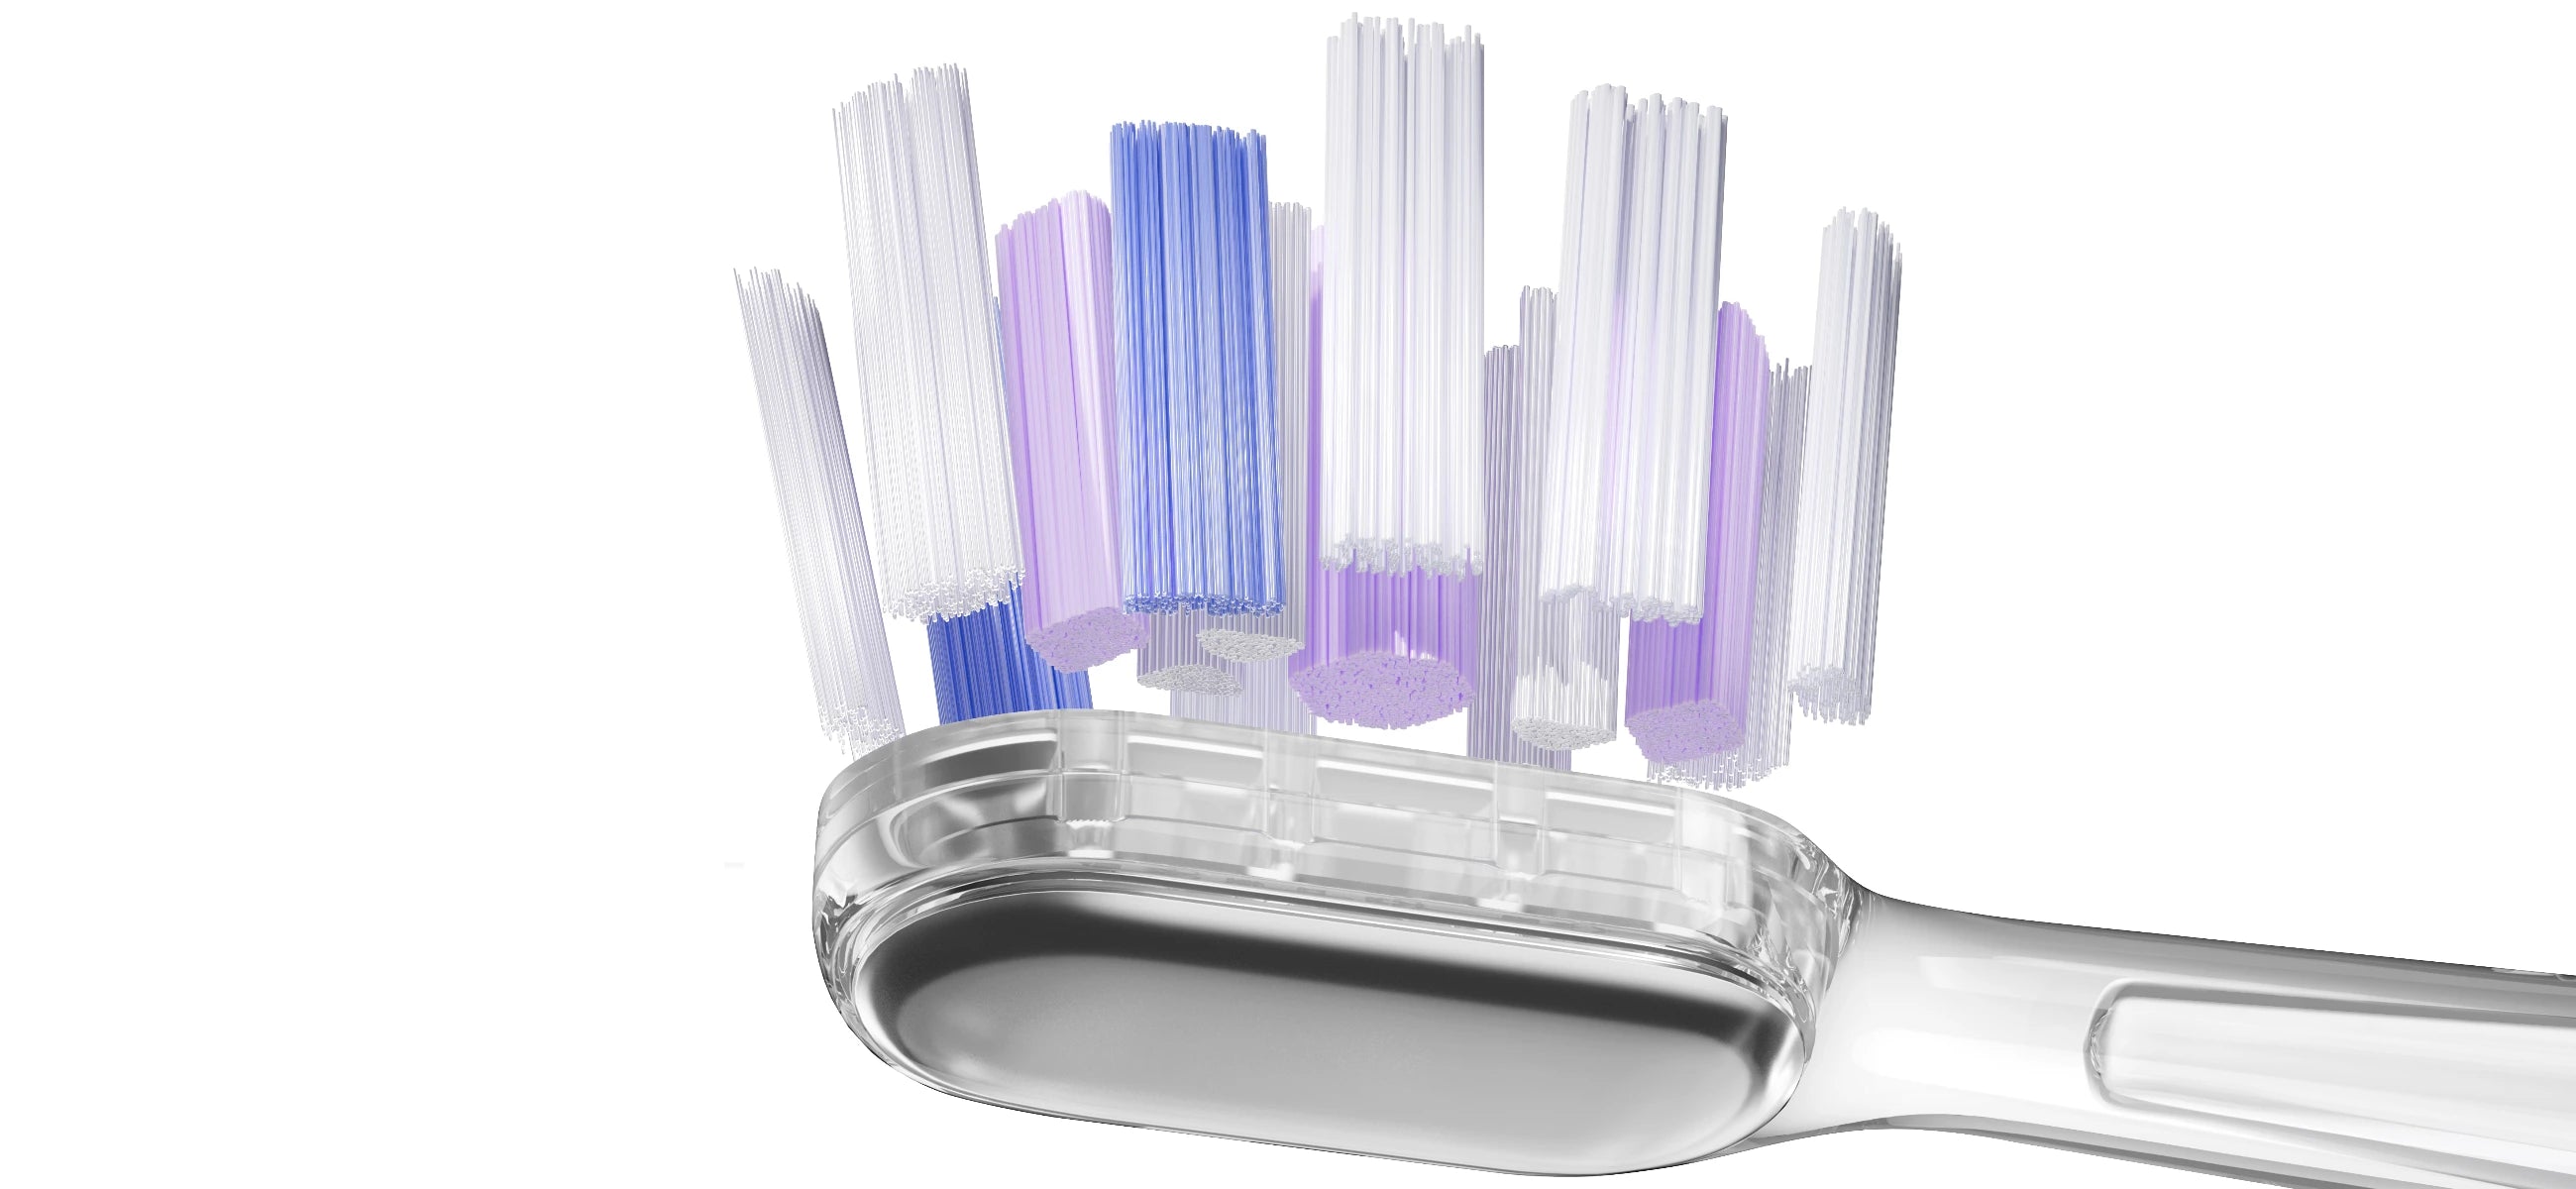 The overview of the heads of Laifen Wave electric toothbrush